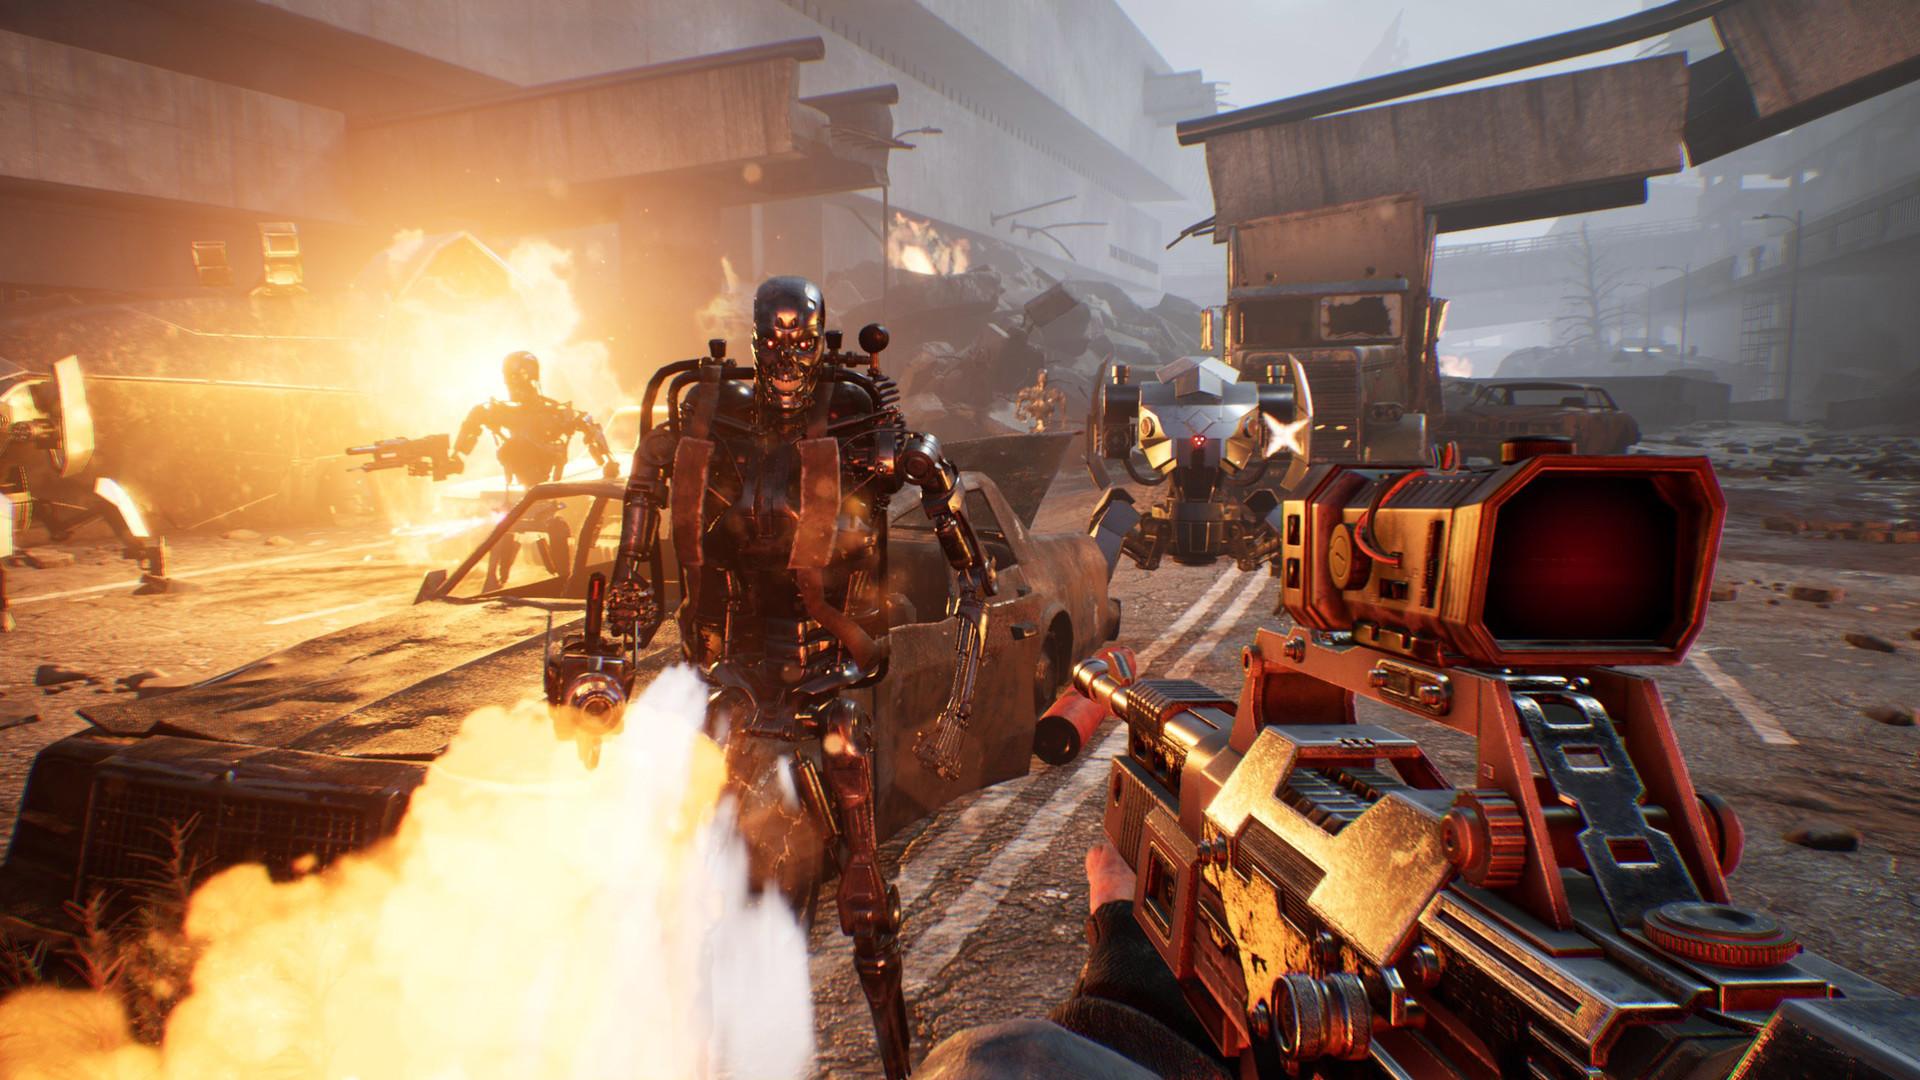 Here's the Terminator: Resistance launch trailer